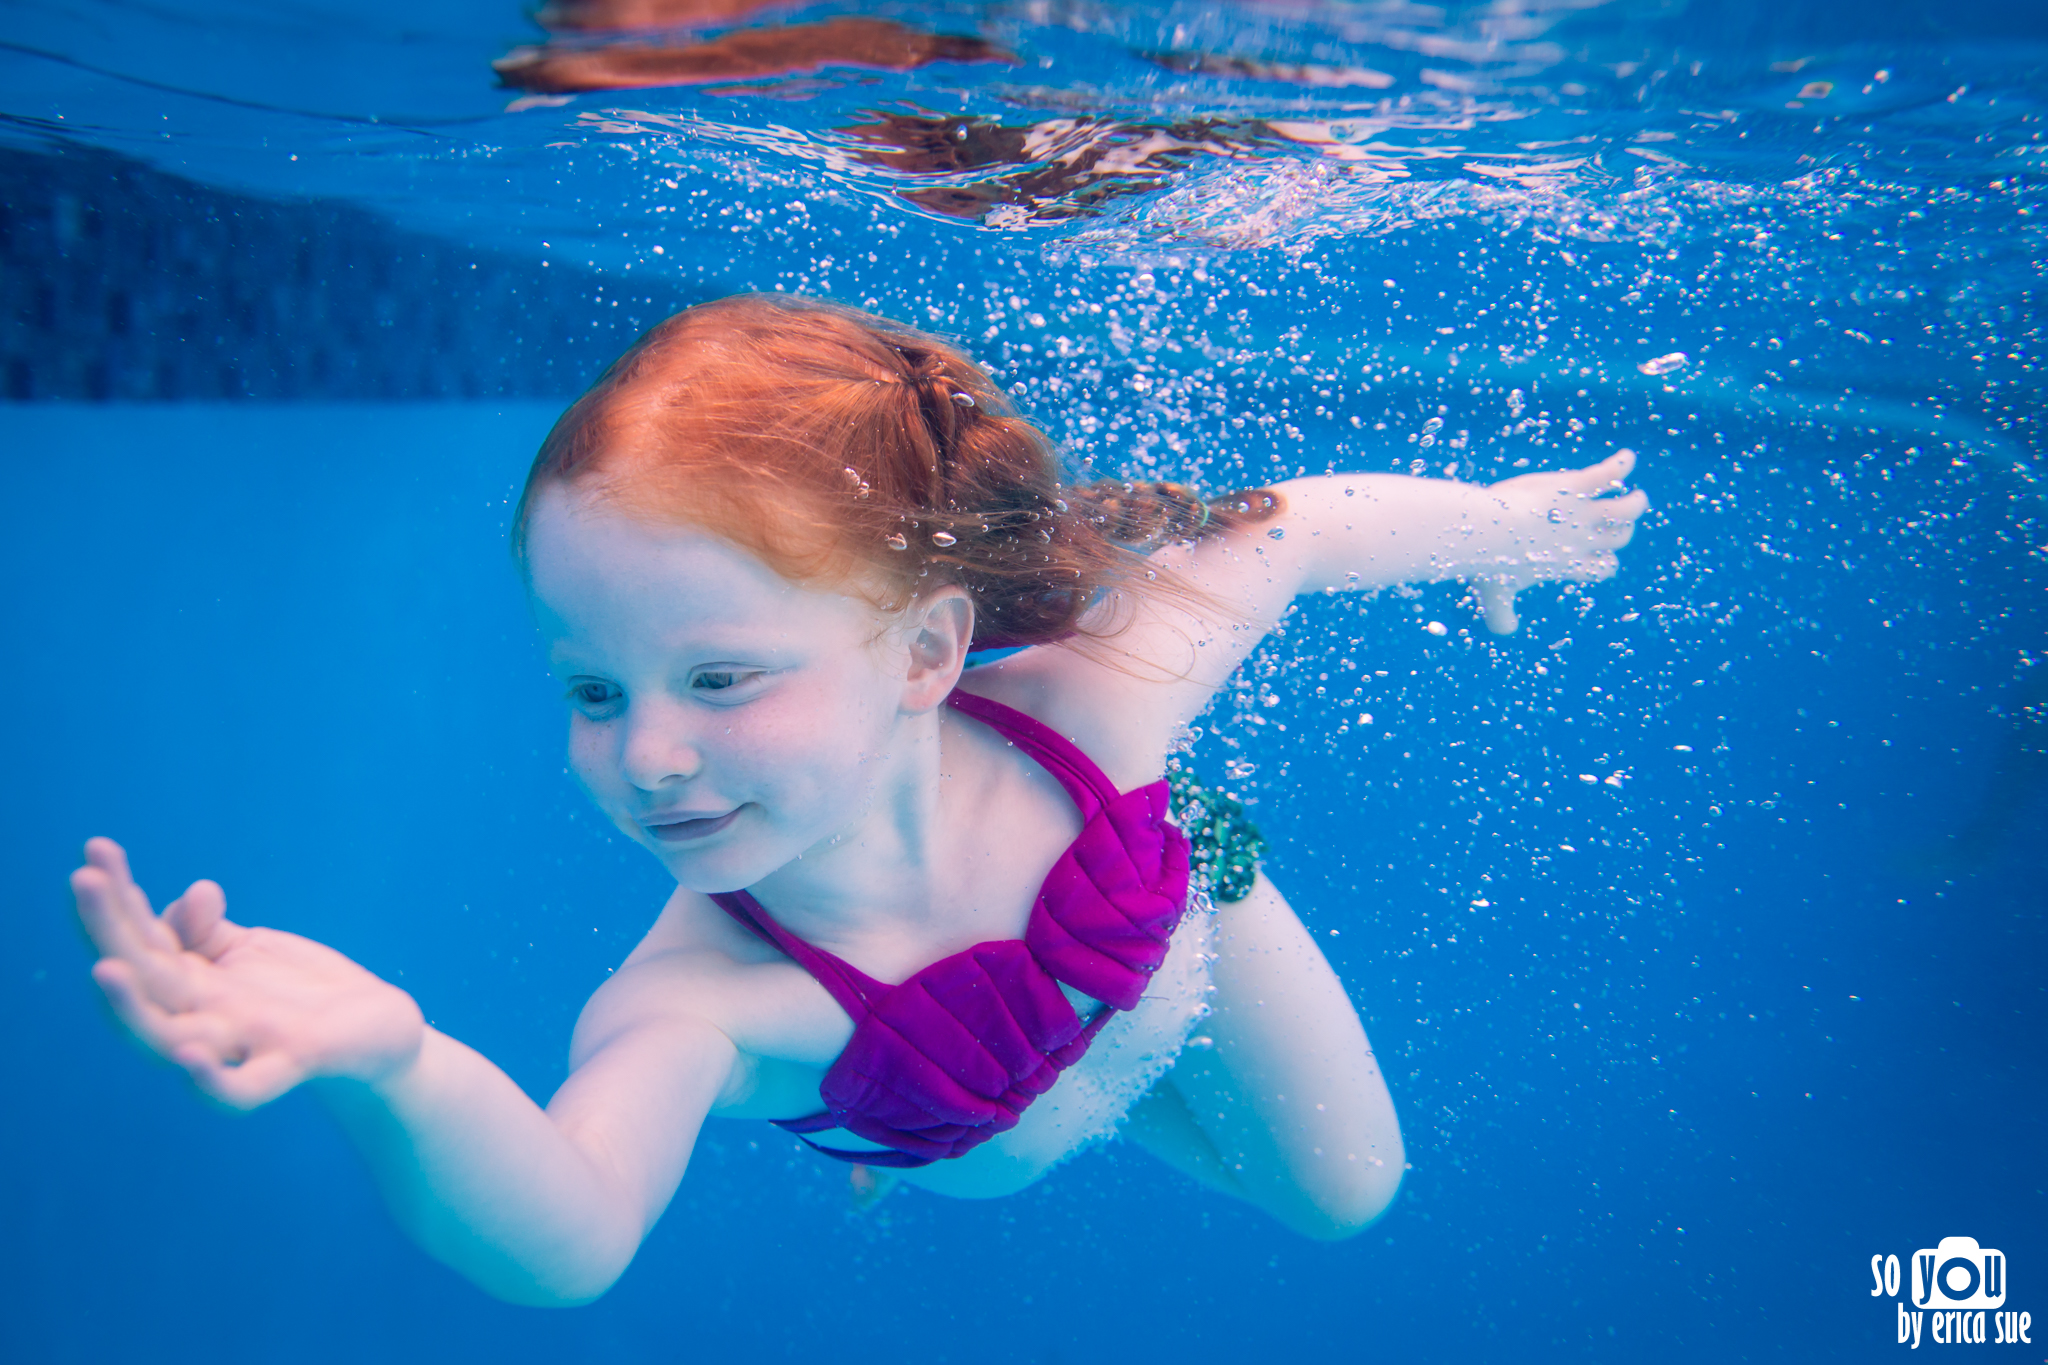 underwater-swim-family-photography-ft-lauderdale-so-you-by-erica-sue-1704.jpg